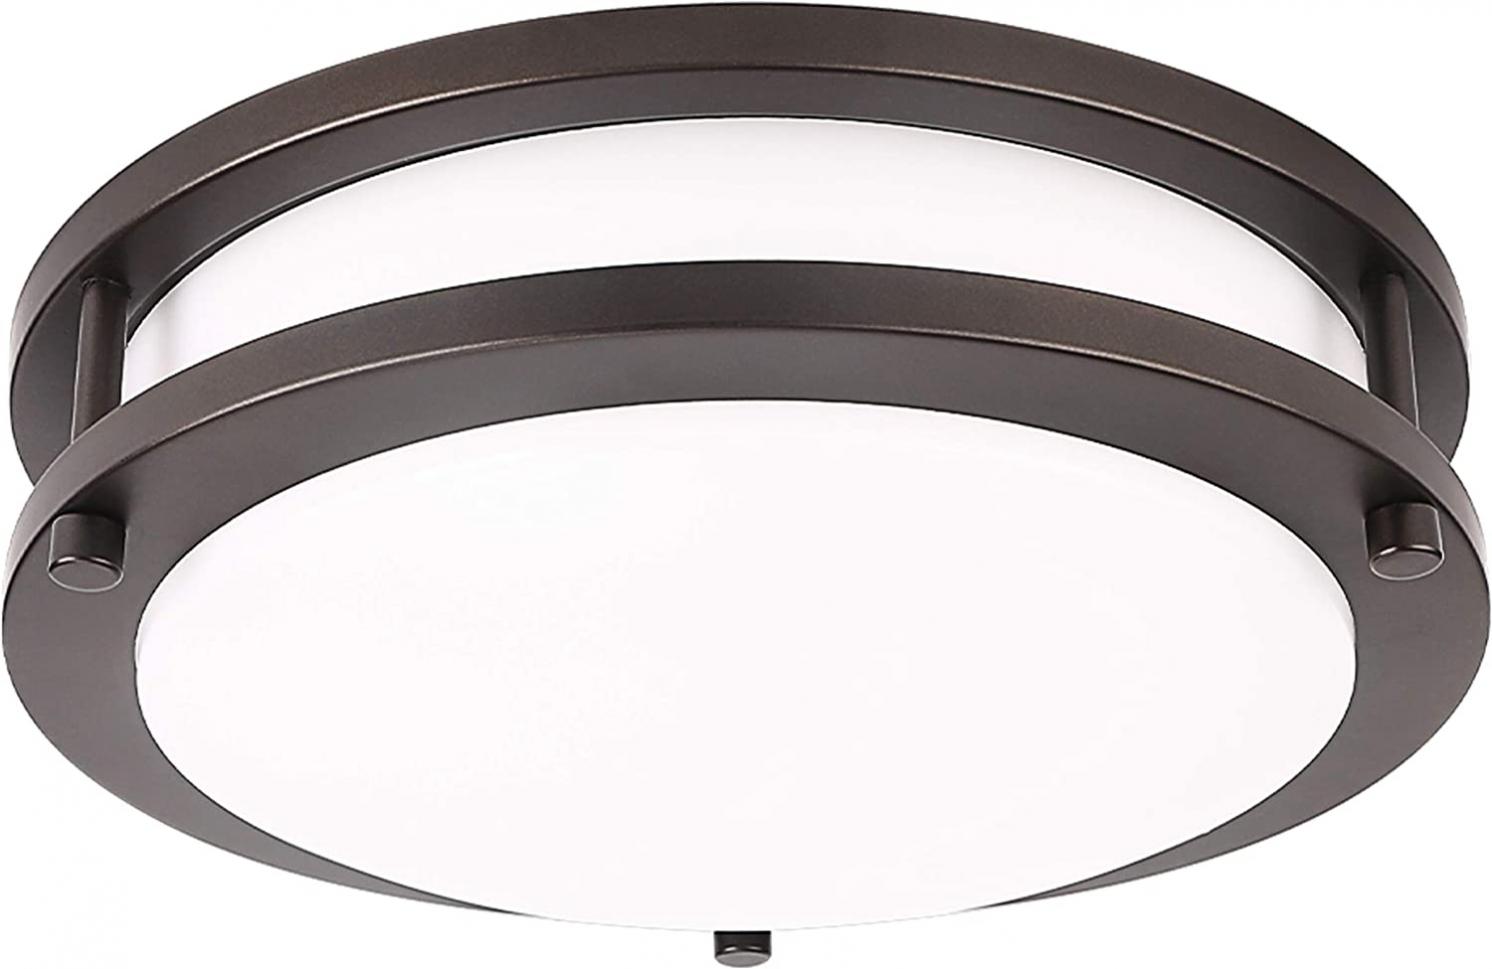 LE LED Flush Mount Ceiling Light, 10 inch Oil Runbbed Bronze Ceiling Light Fixture Dimmable, 1200lm 16W (120W Equivalent) Ceiling Lamp for Kitchen, Bedroom, Laundry, Living Room Hallway, 4000K White